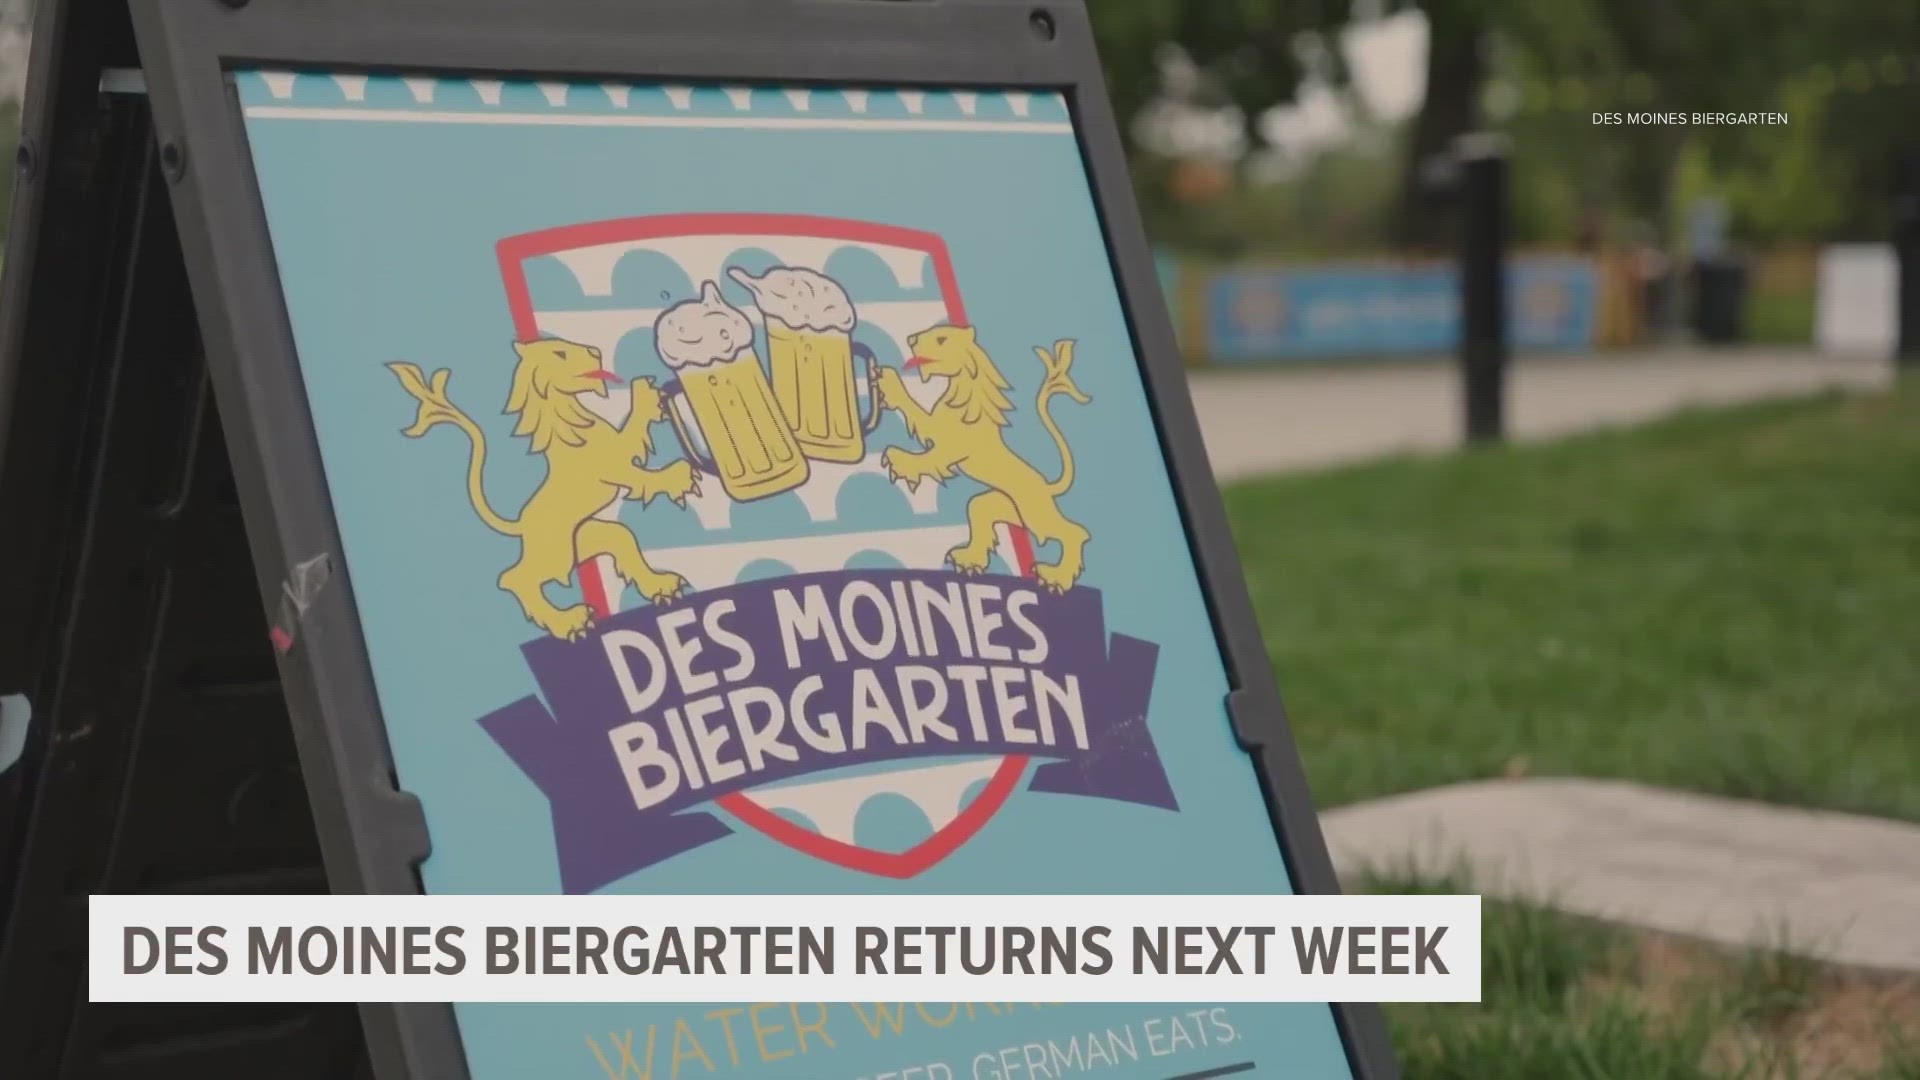 The Des Moines Biergarten season kicks off May 17. It's open Wednesday through Sunday until the fall.